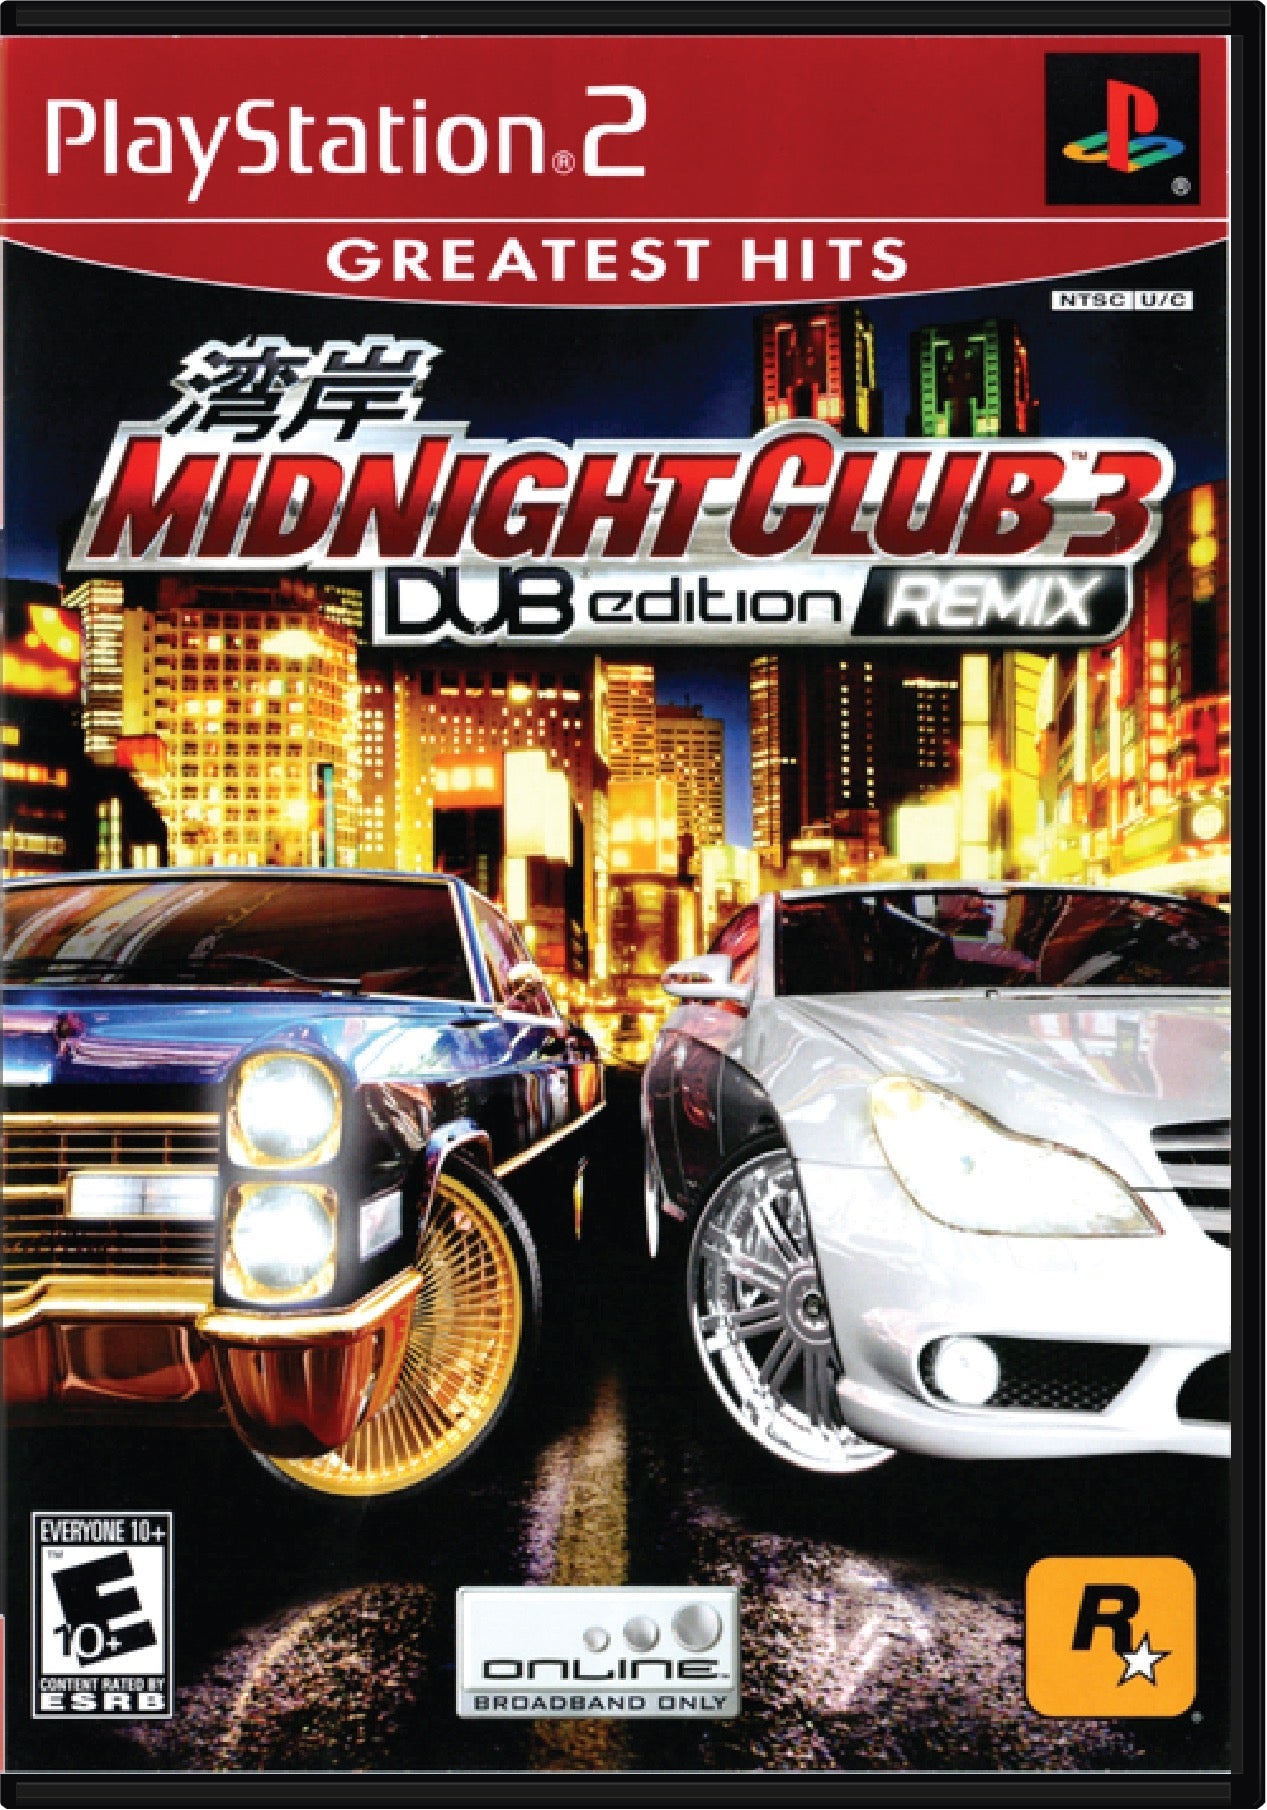 Midnight Club 3 Dub Edition Remix Cover Art and Product Photo